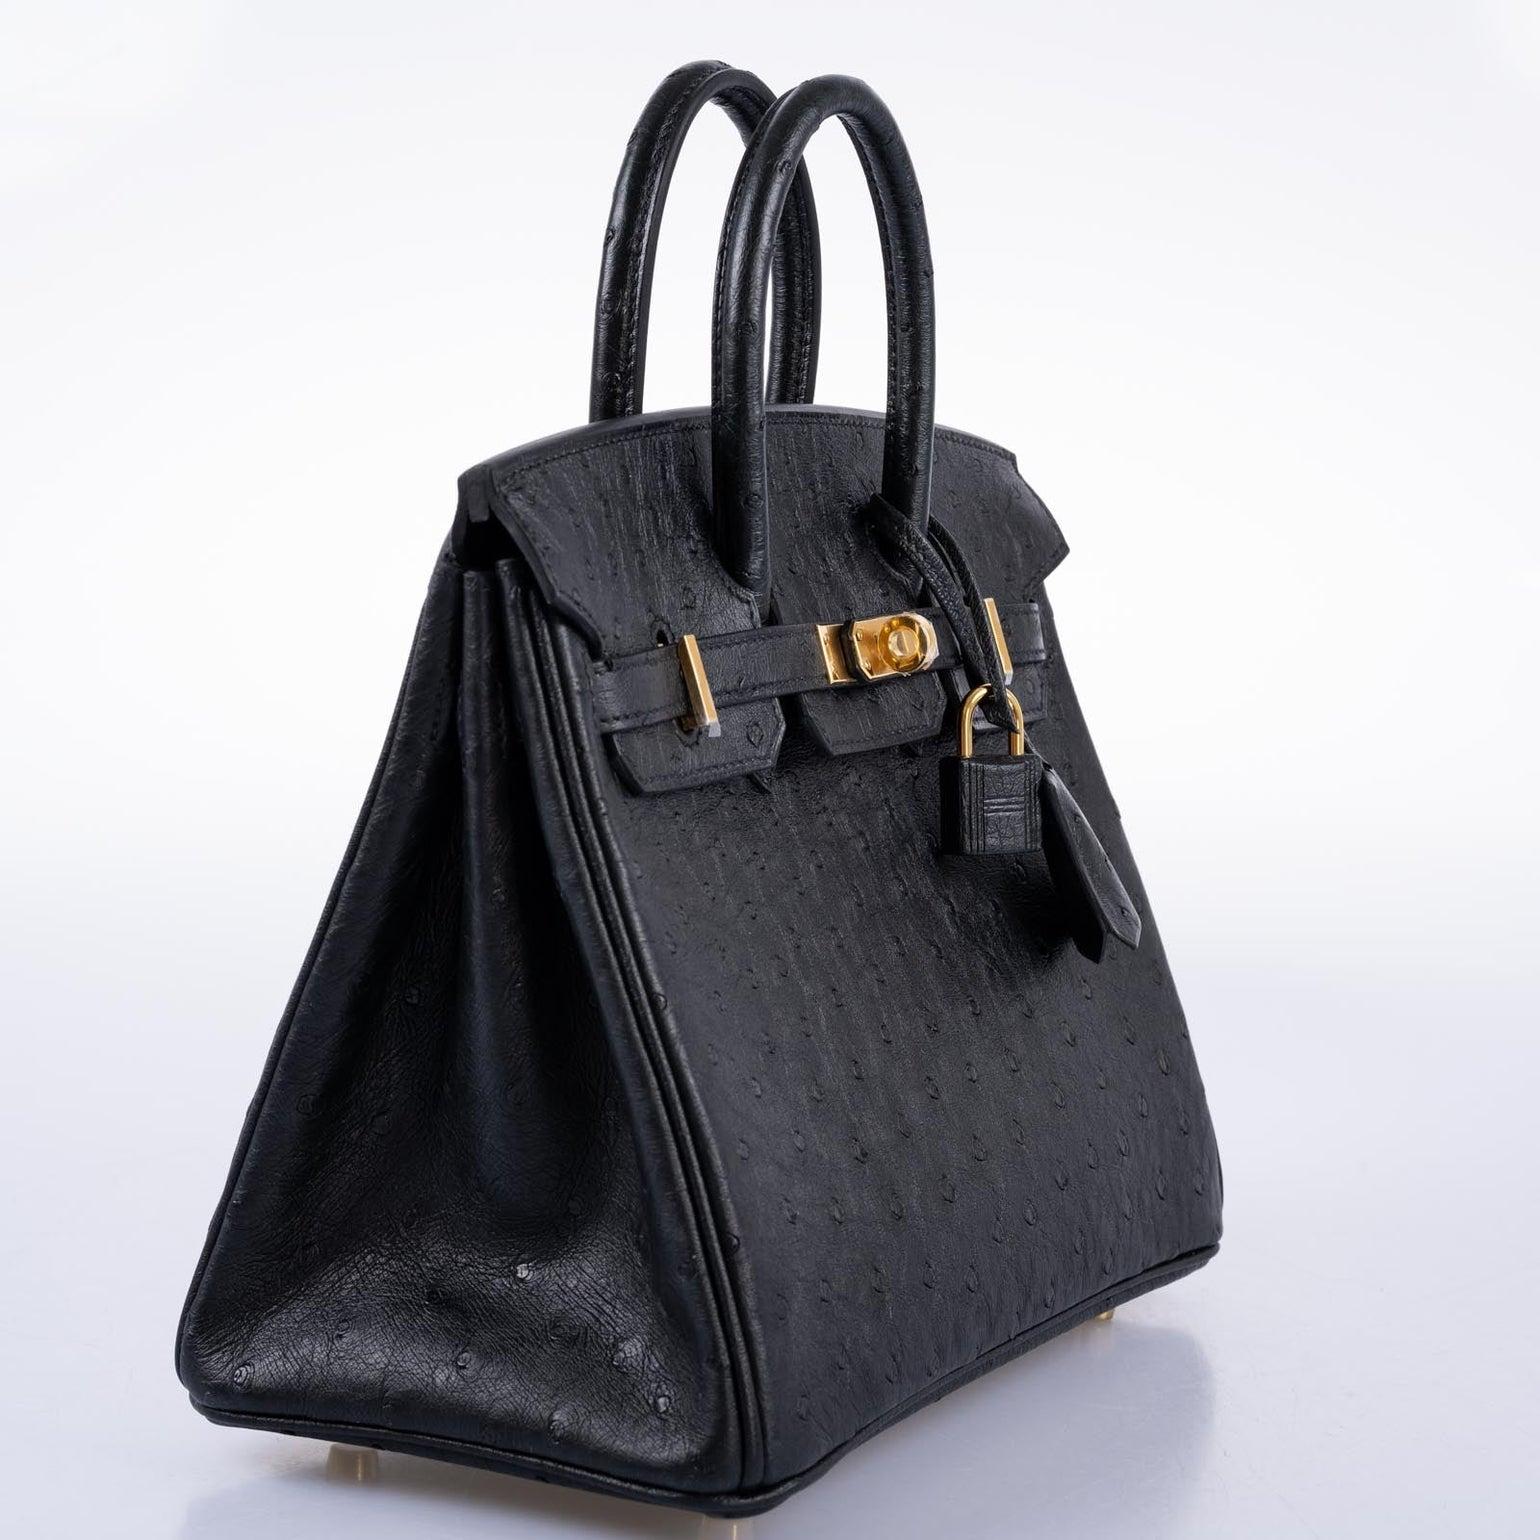 Hermes black Ostrich hac with gold hardware and Hermes 35cm